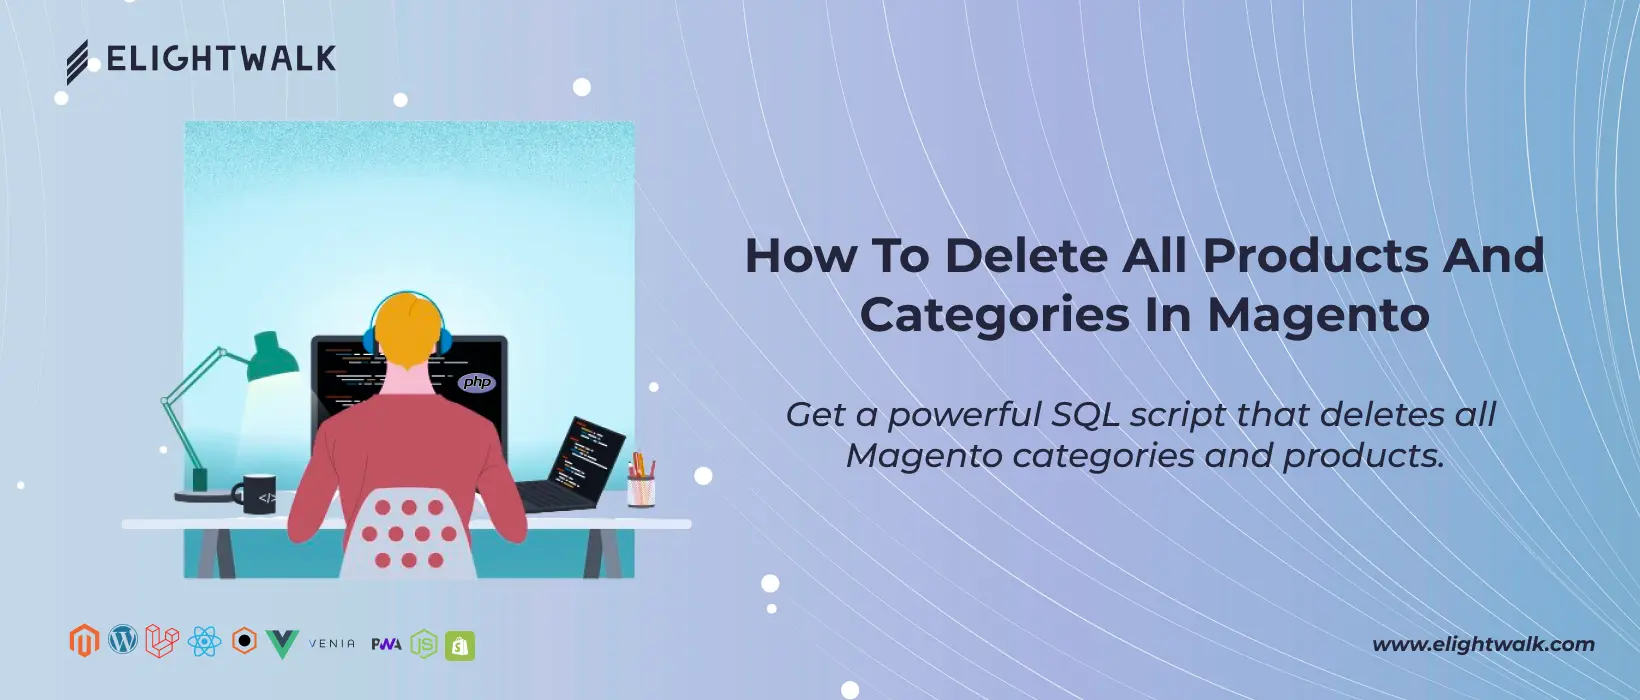  delete all products and categories in Magento